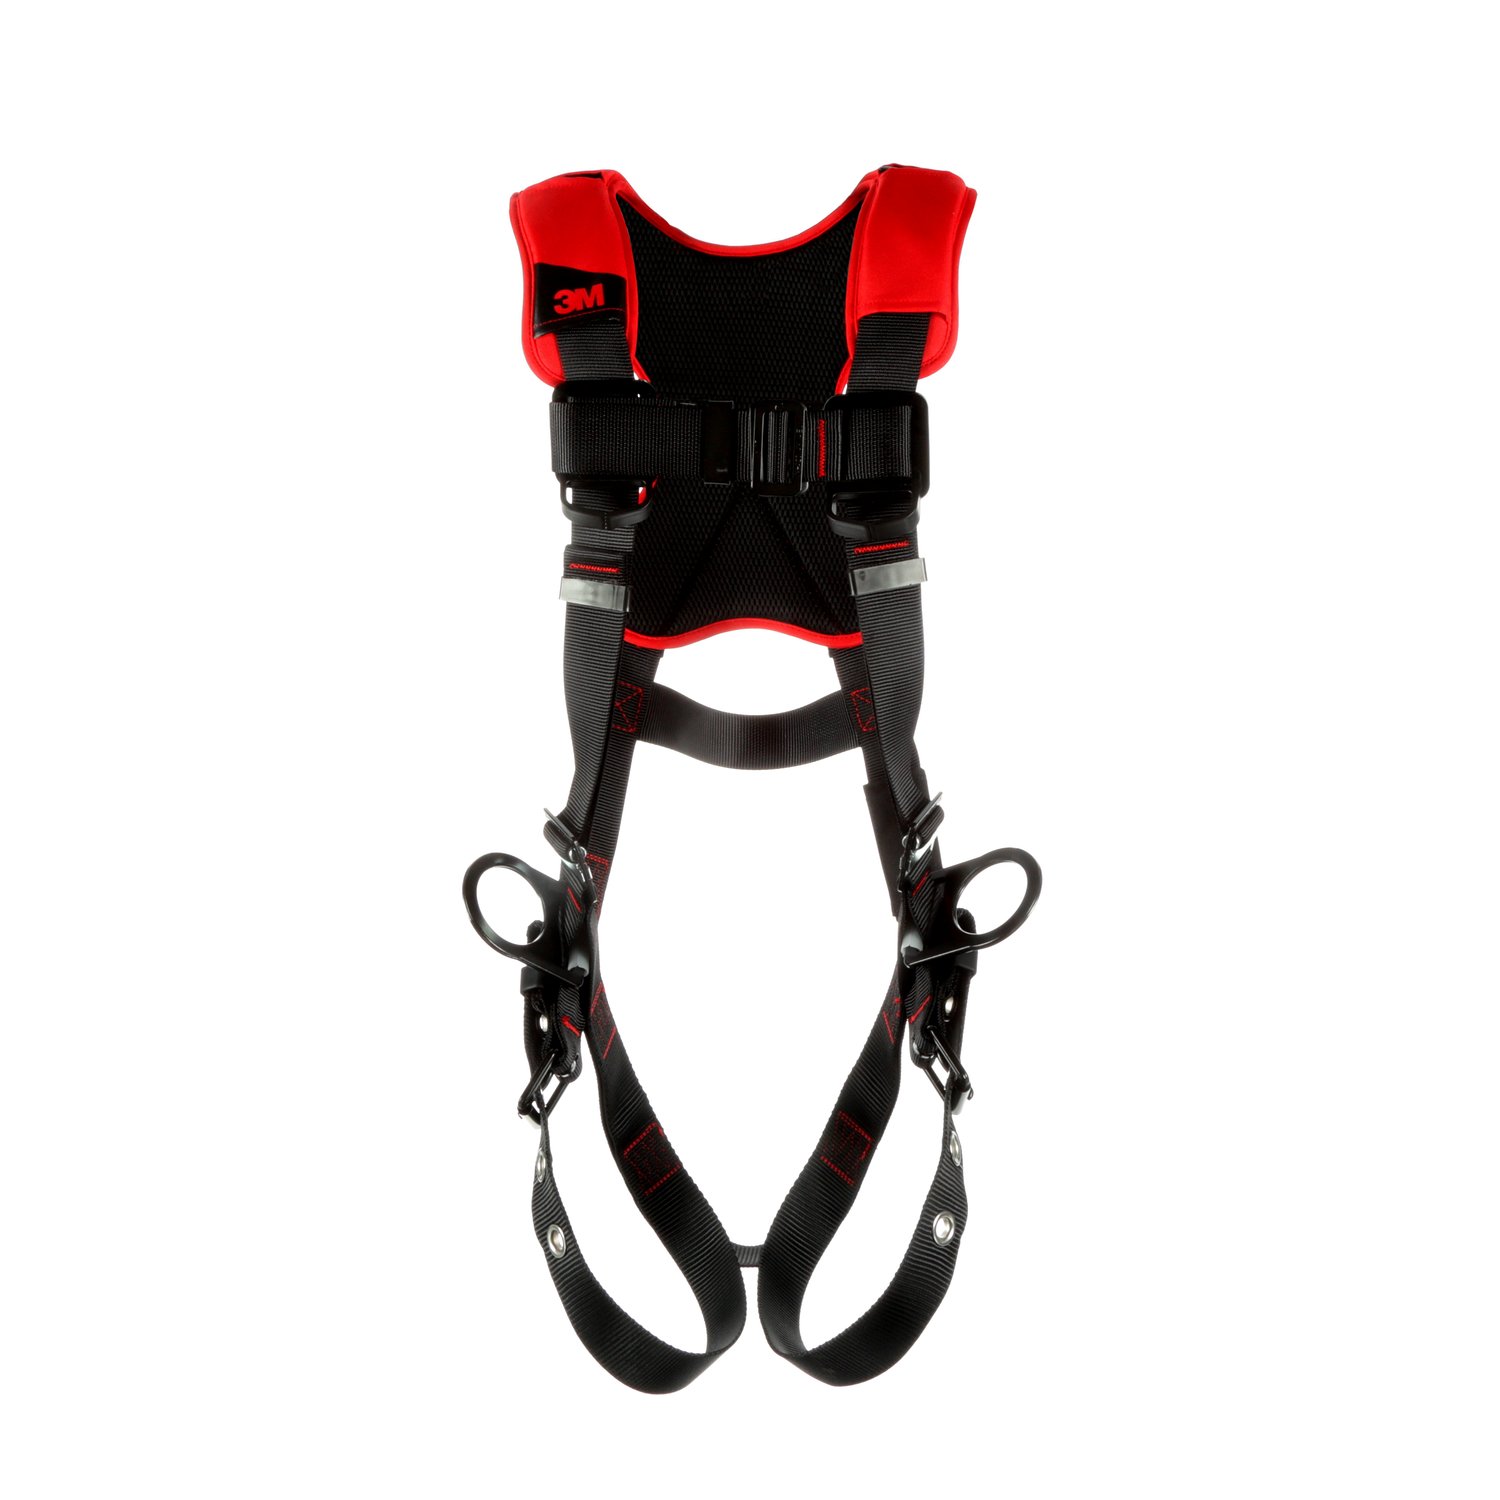 7012816681 - 3M Protecta P200 Comfort Vest Positioning Safety Harness 1161413, Small